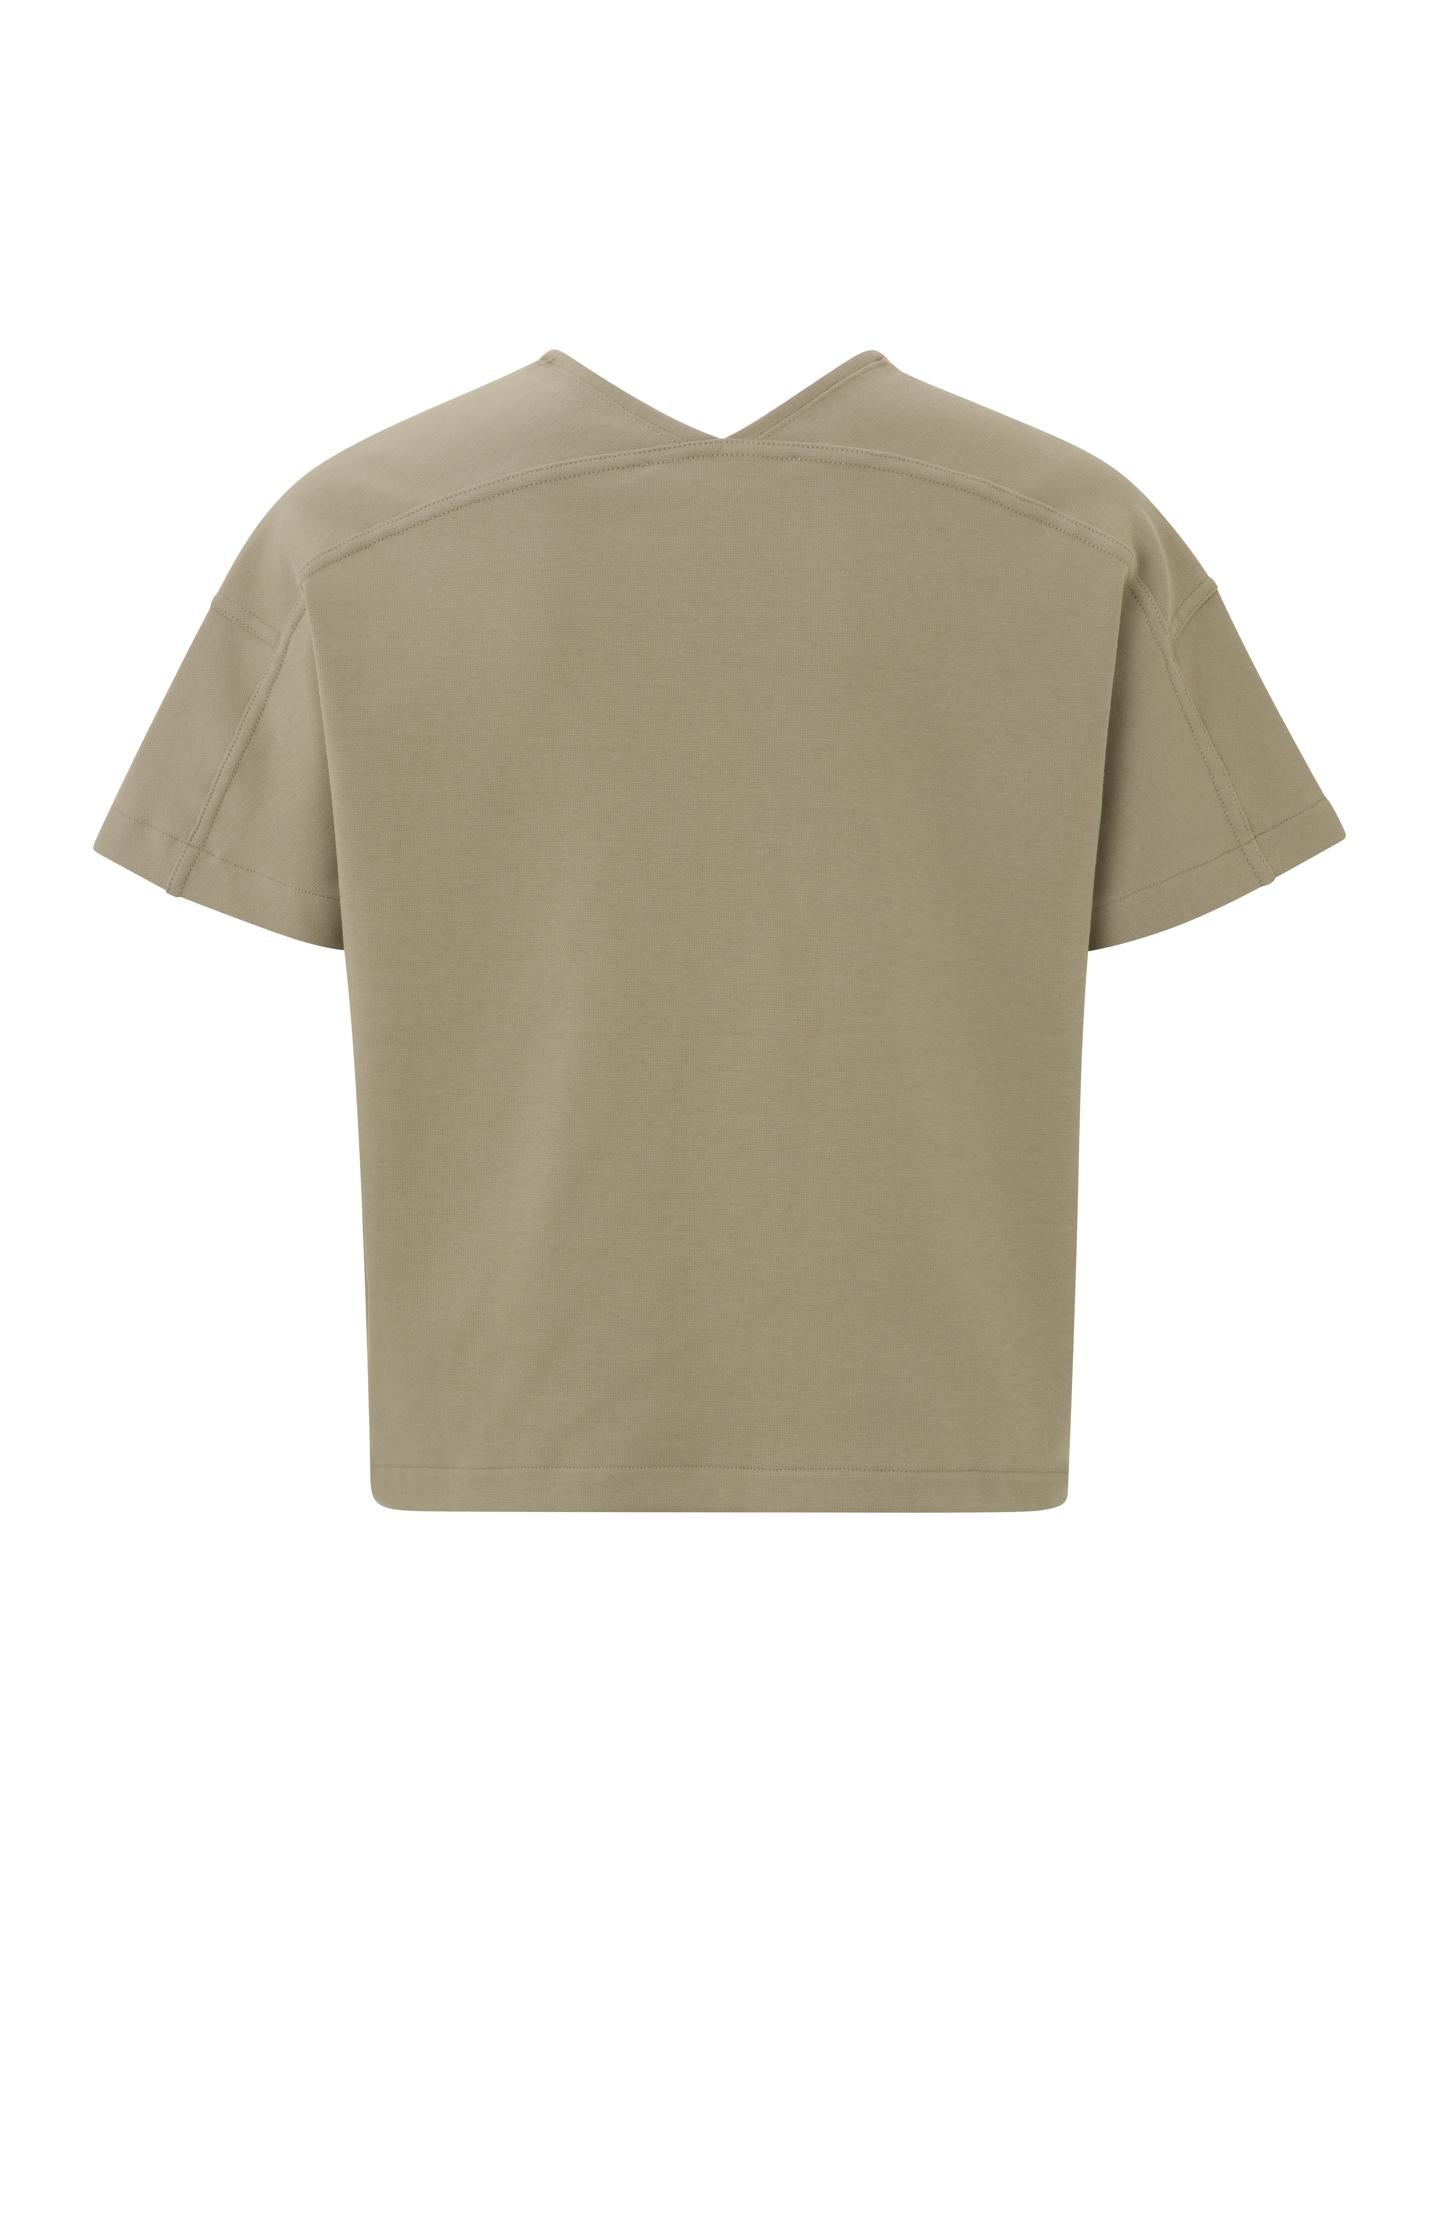 T-shirt with V-neck, short sleeves and seam details